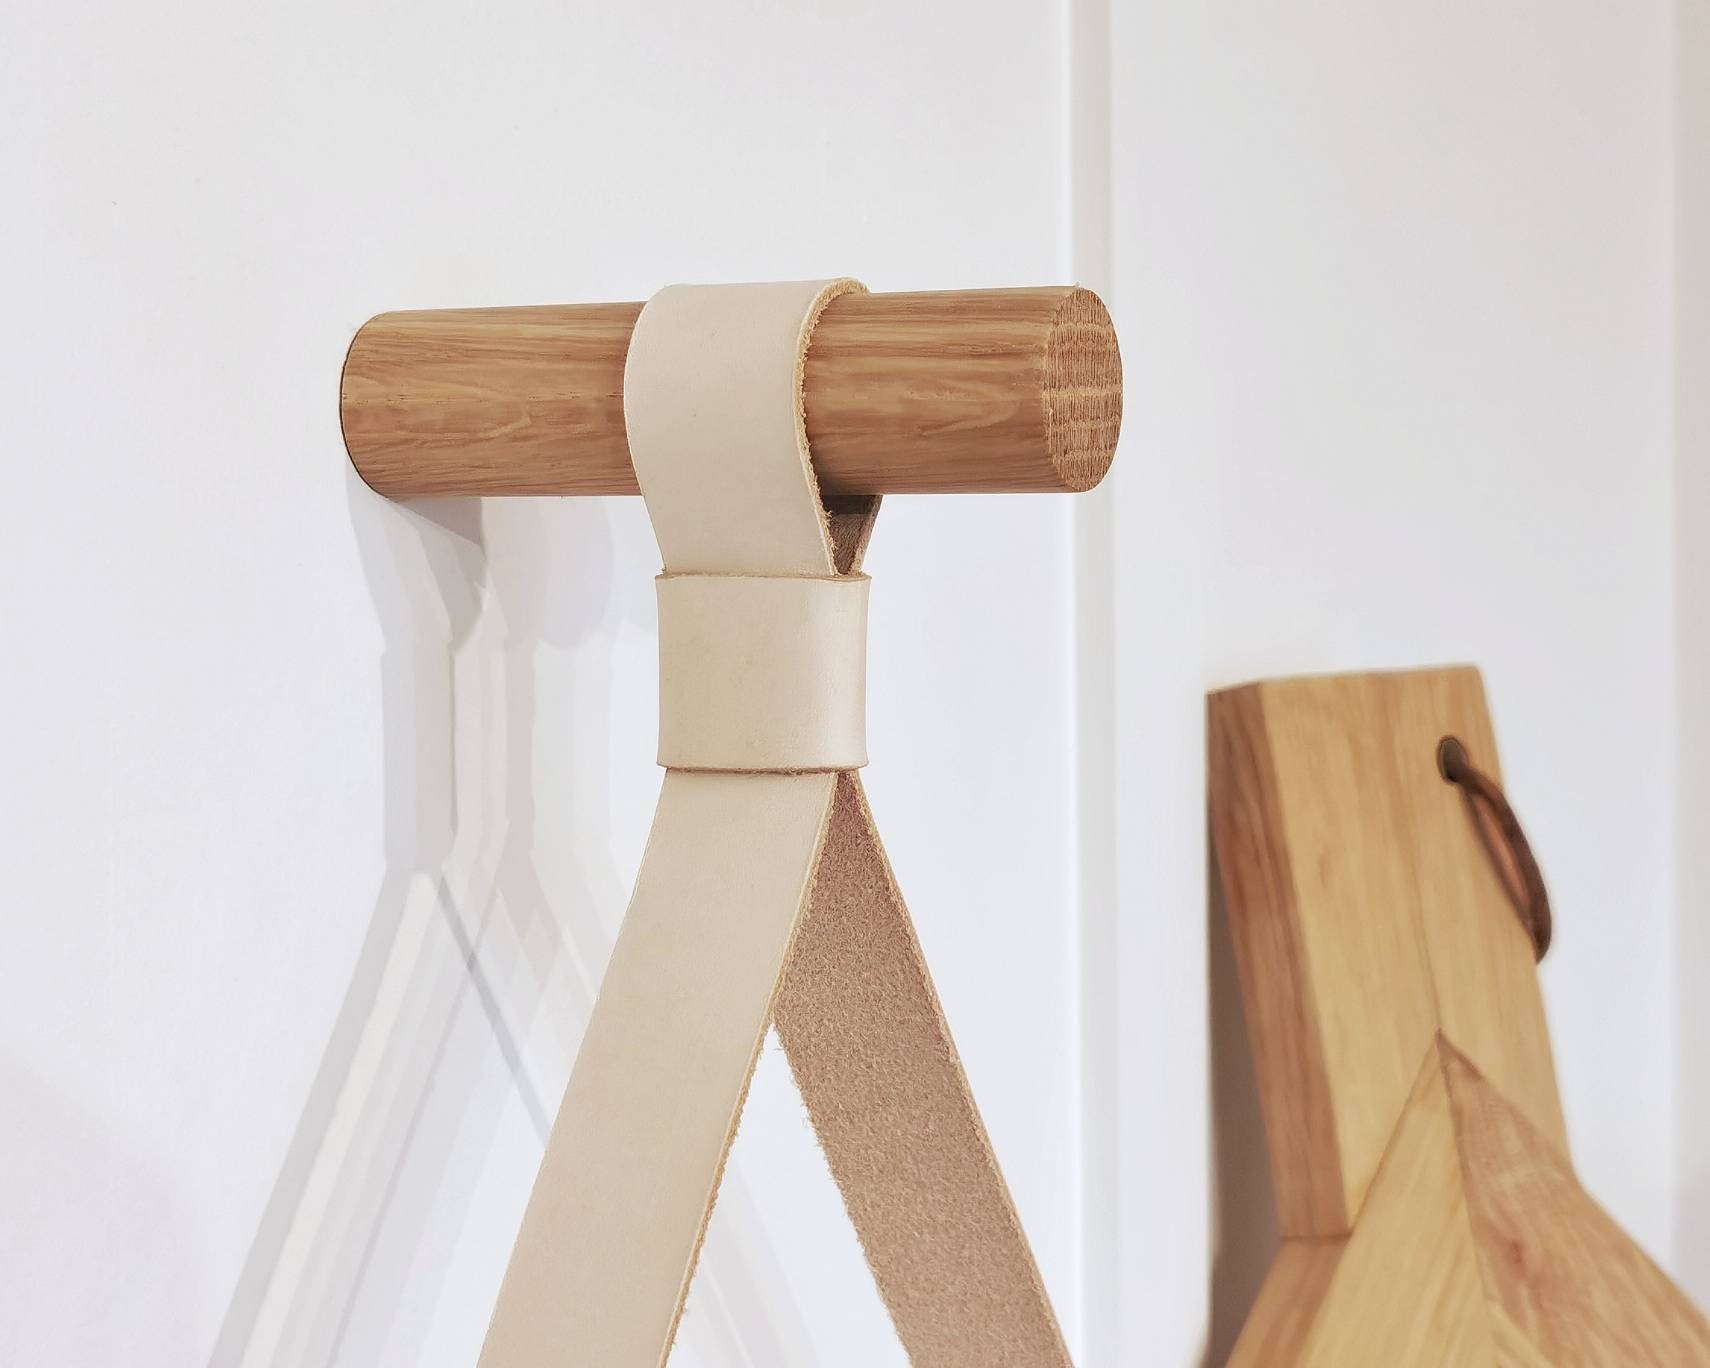 Towel rail / Towel holder made from Oak and Leather